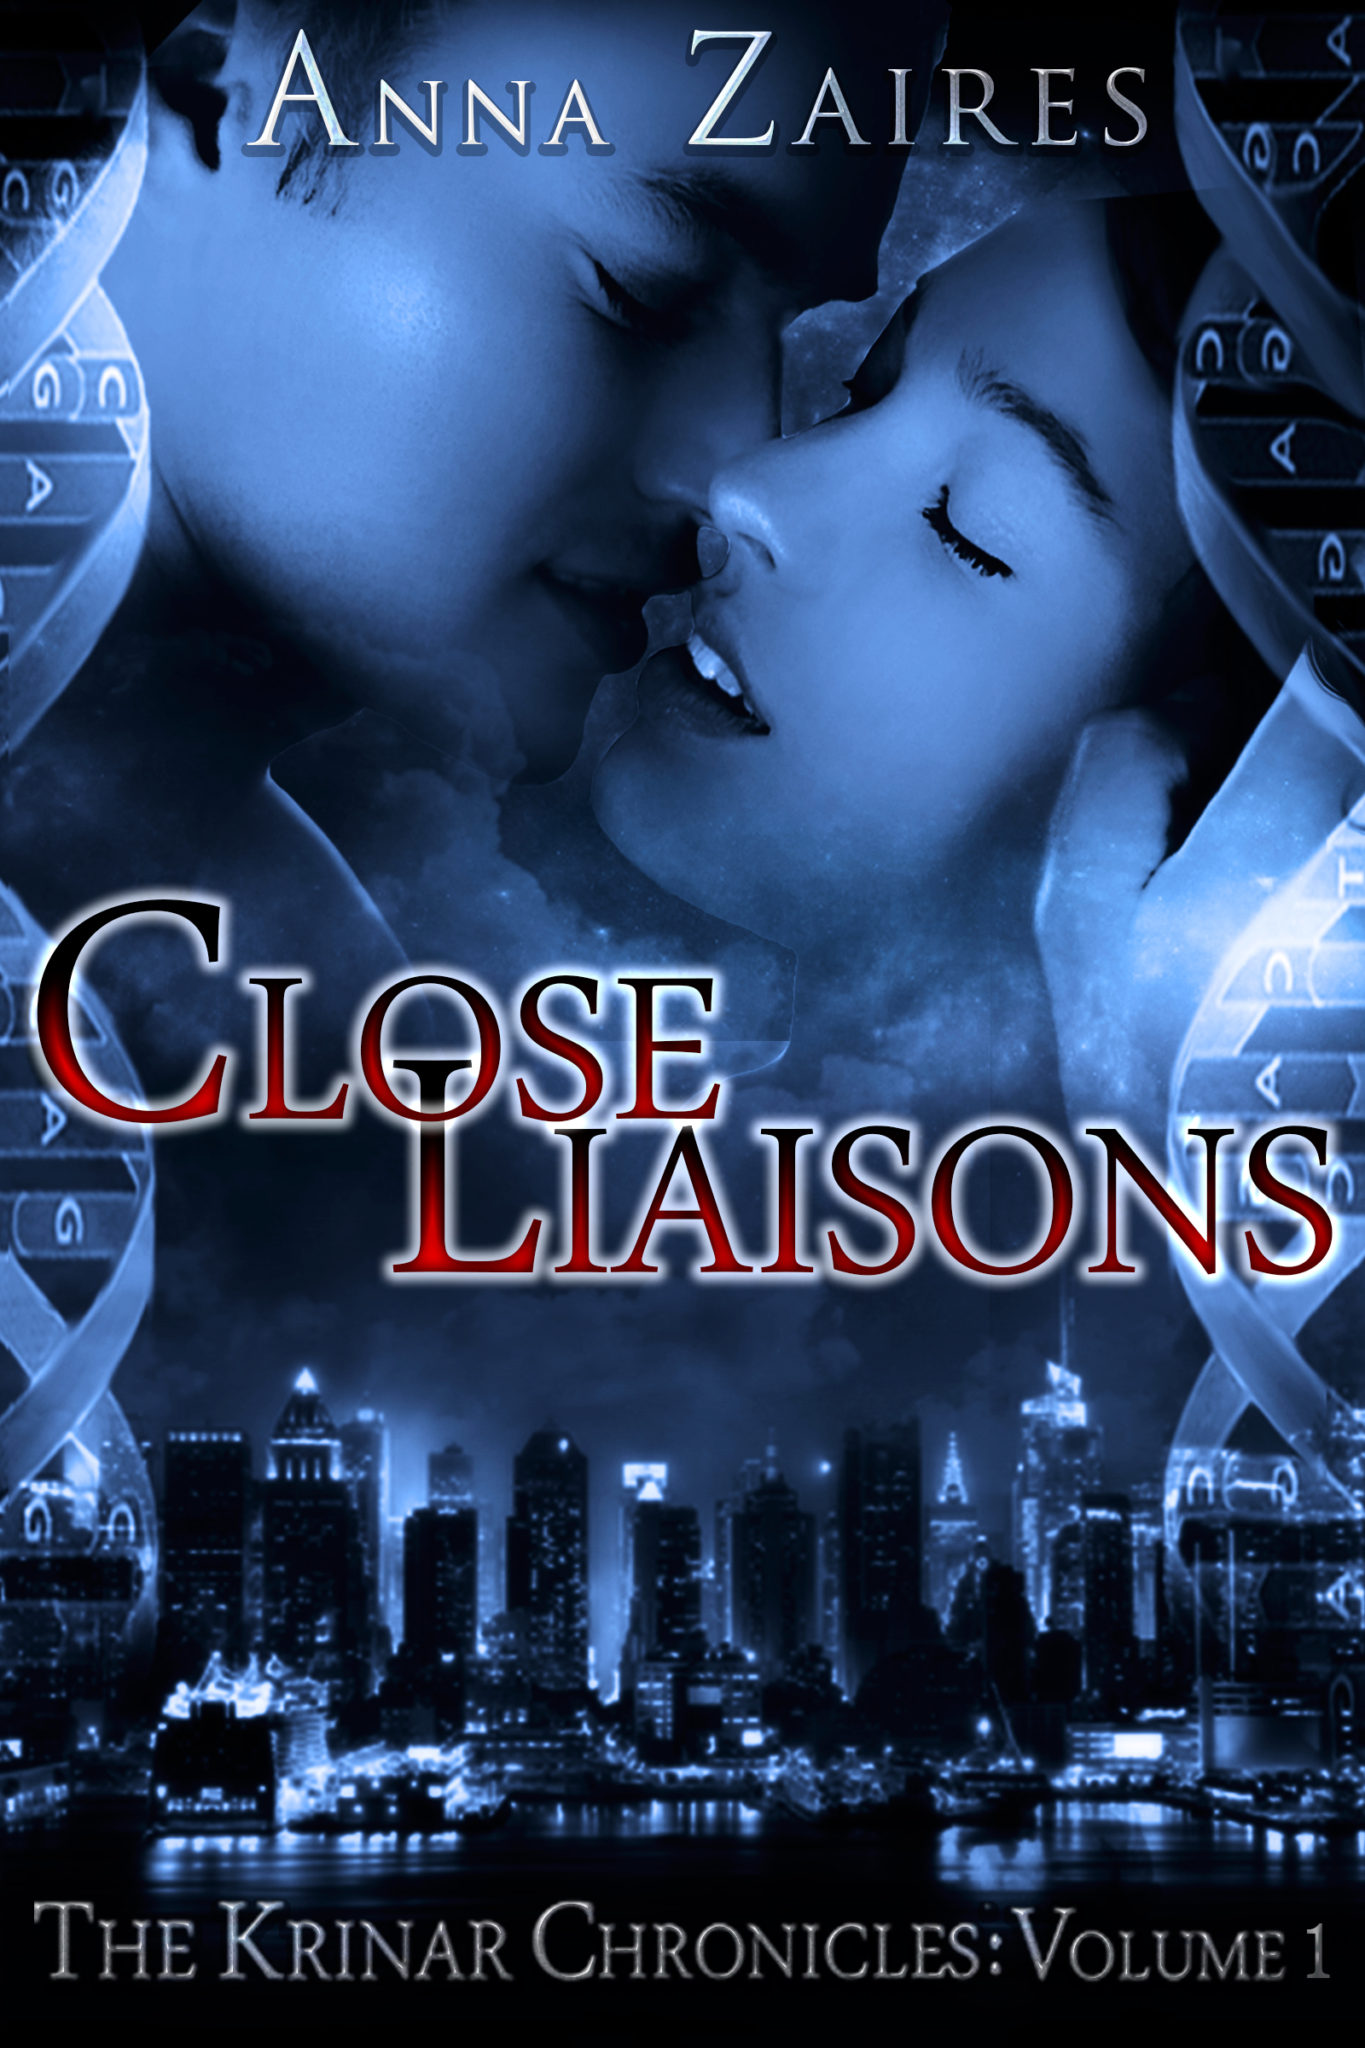 FREE: Close Liaisons by Anna Zaires